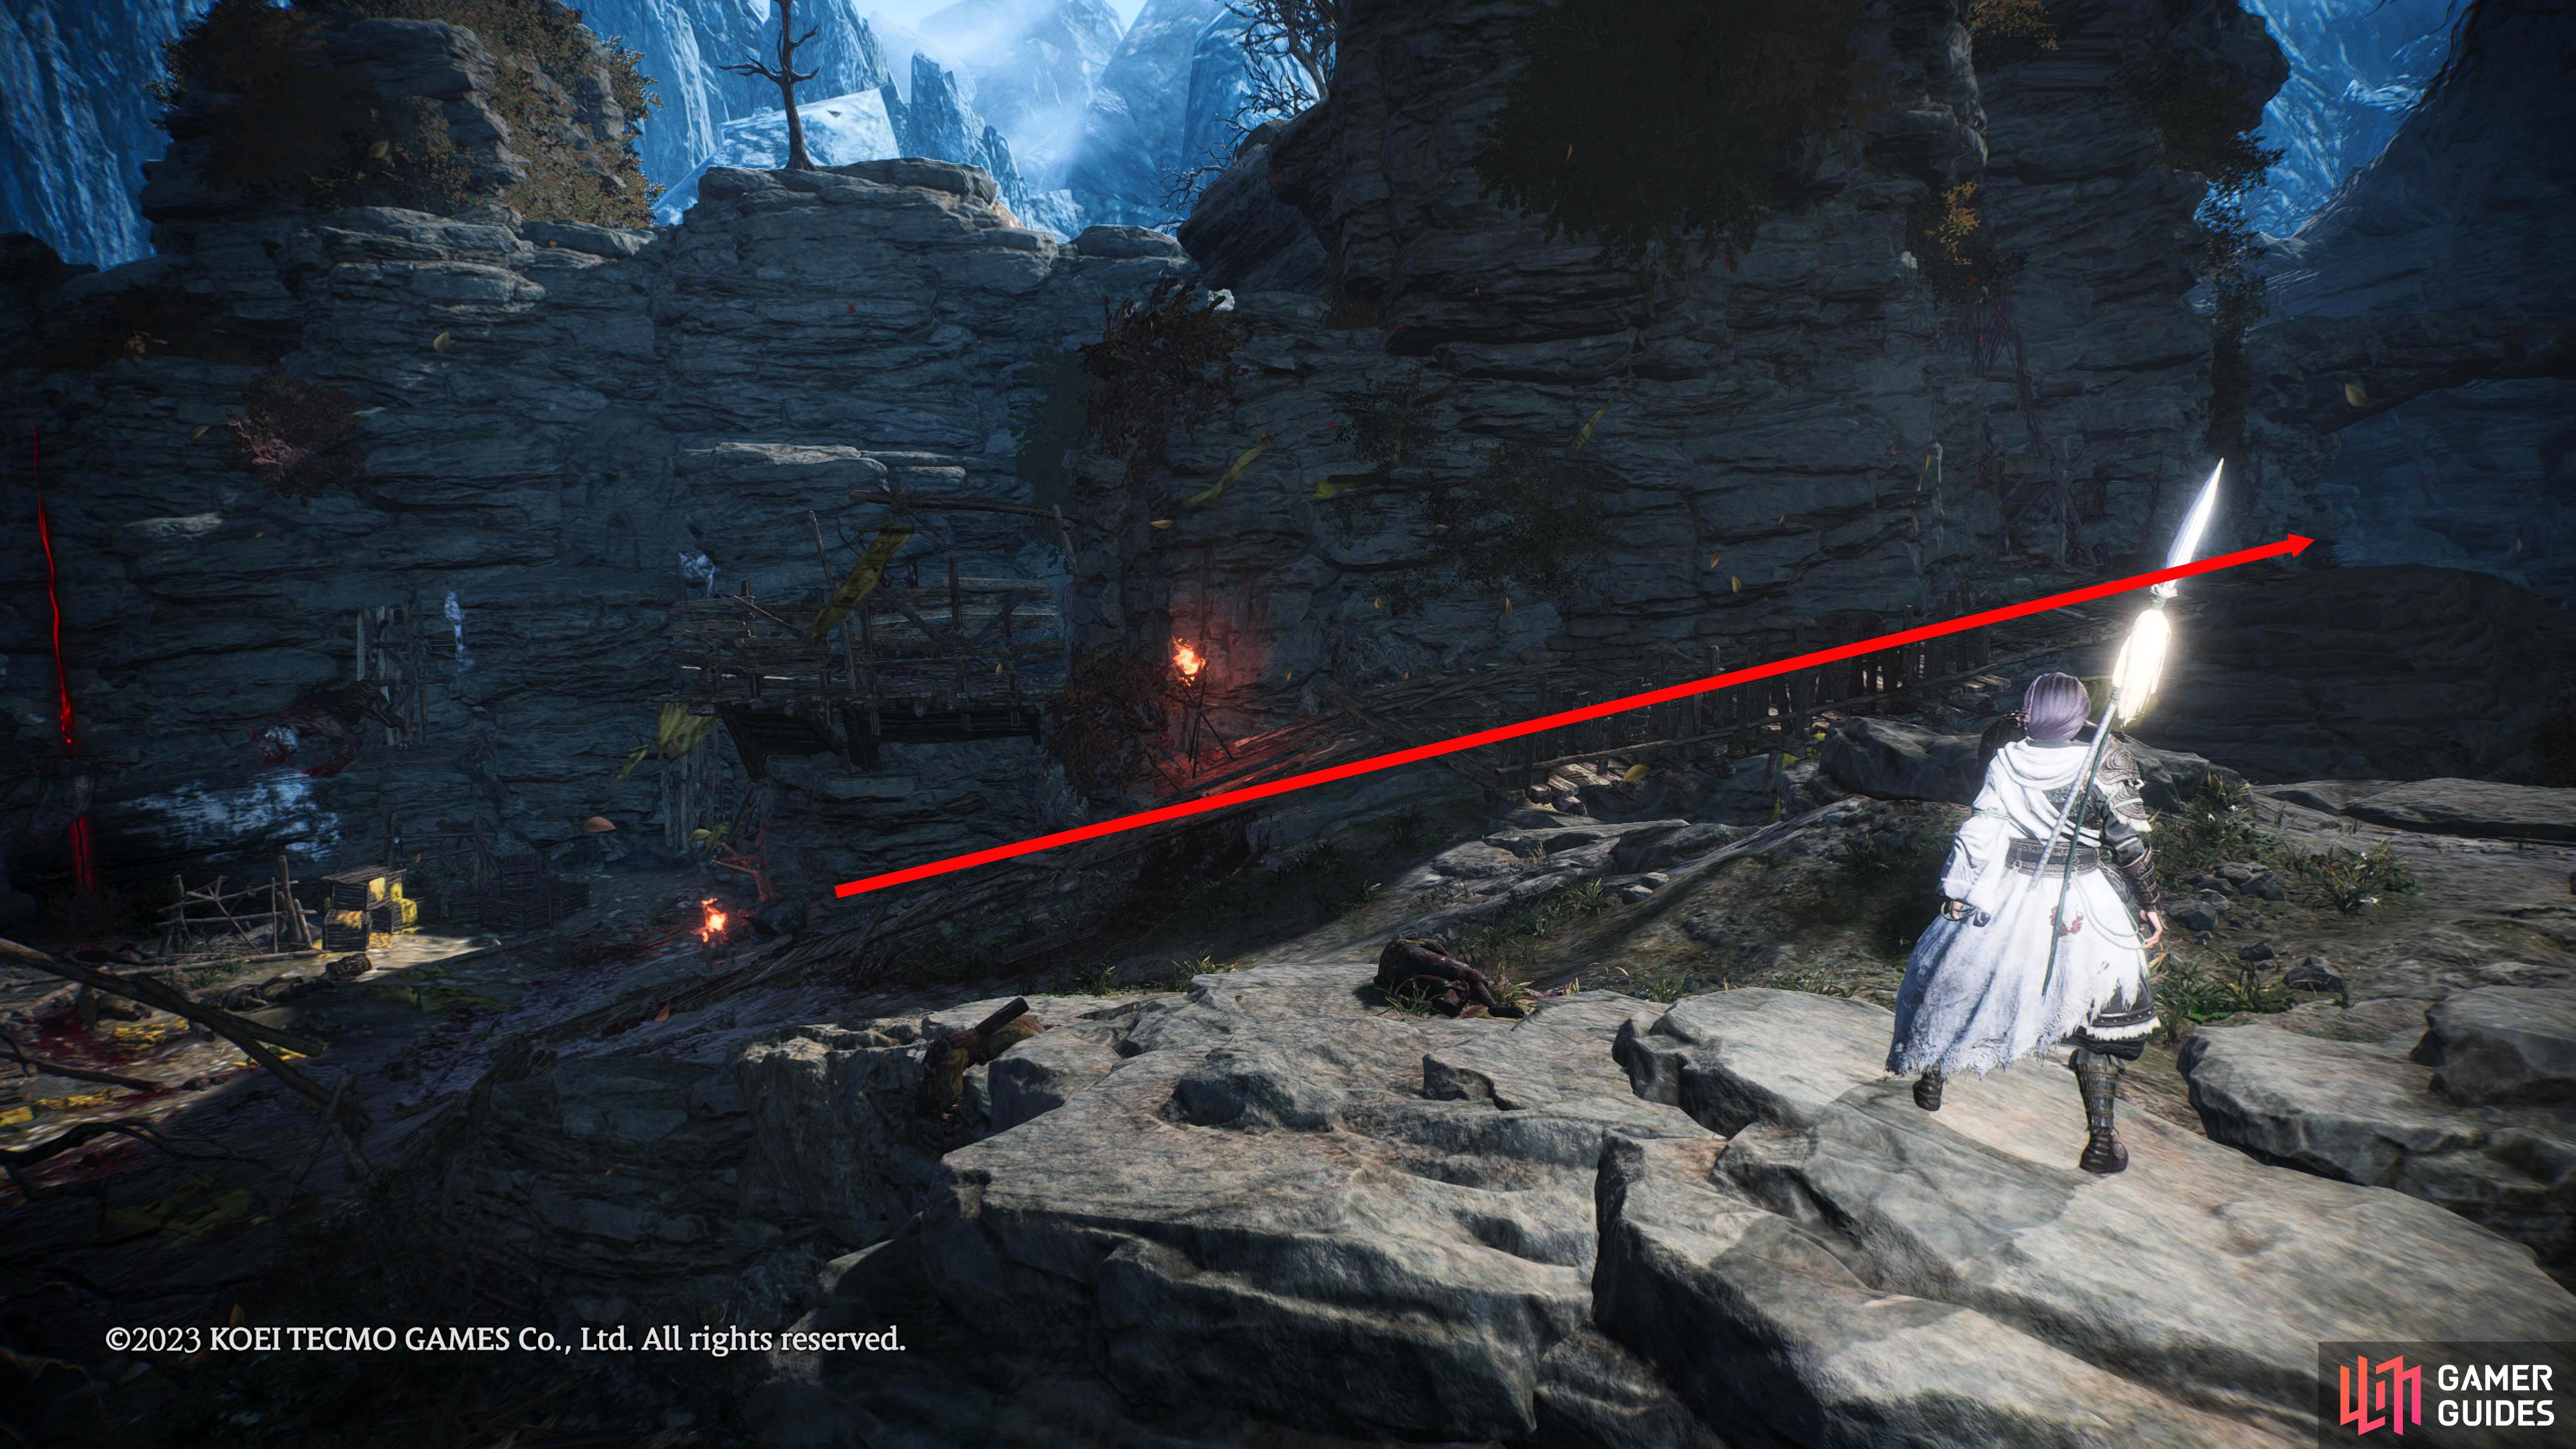 From the Changgui Battle Flag take the right path up the cliff and jump up the blocks around the corner to reach the Warlock.